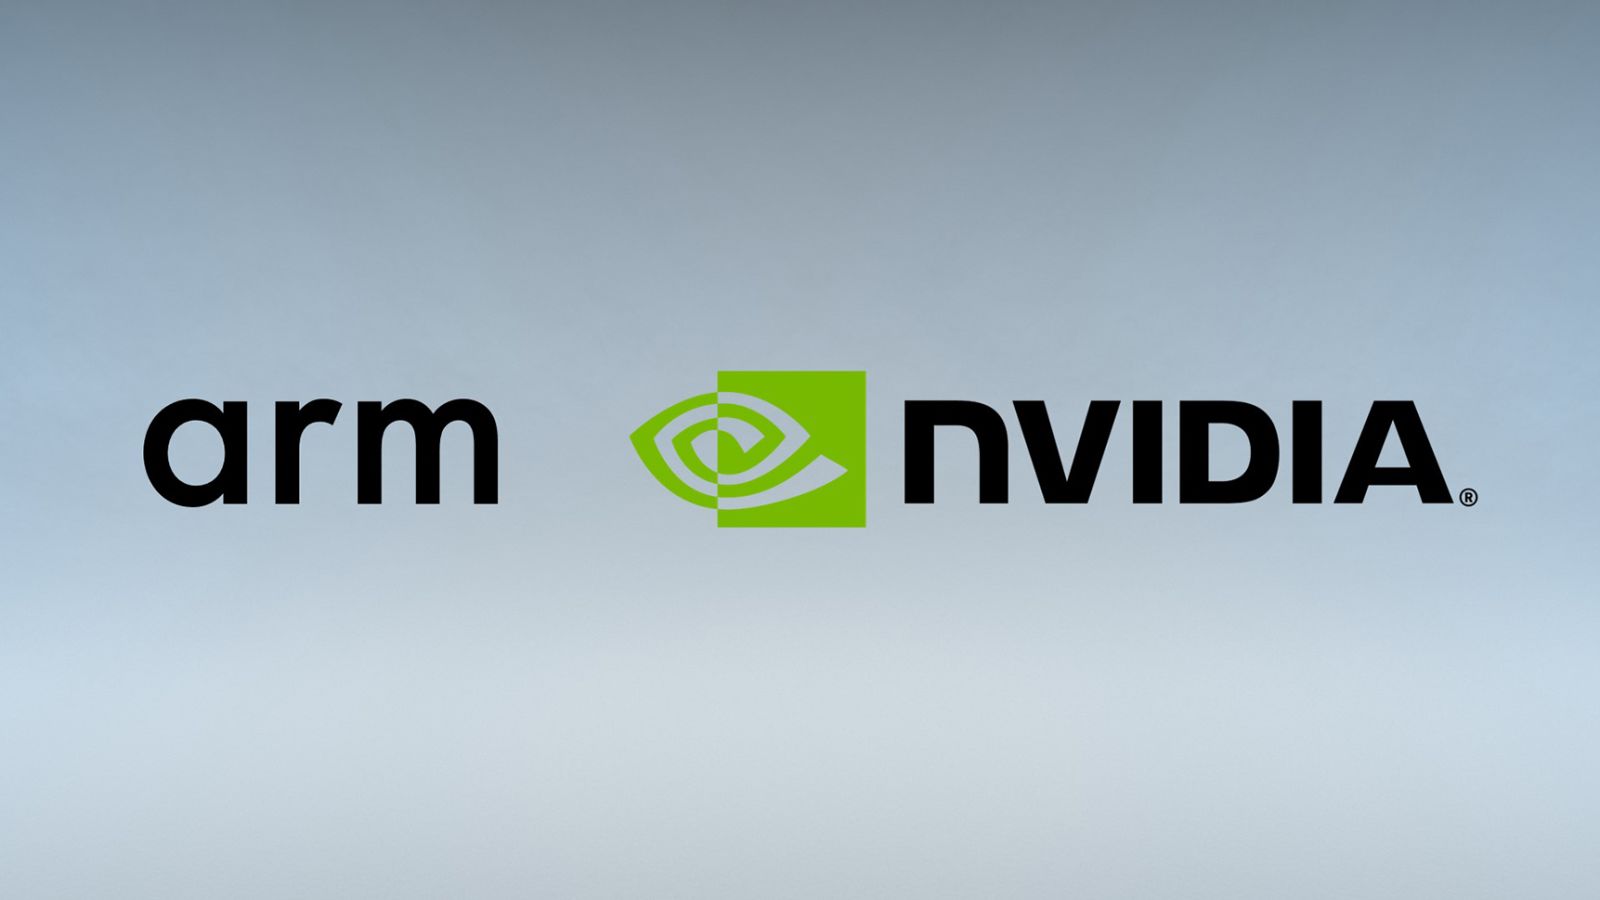 Illustration for article titled Nvidia: All your ARM are belong to us